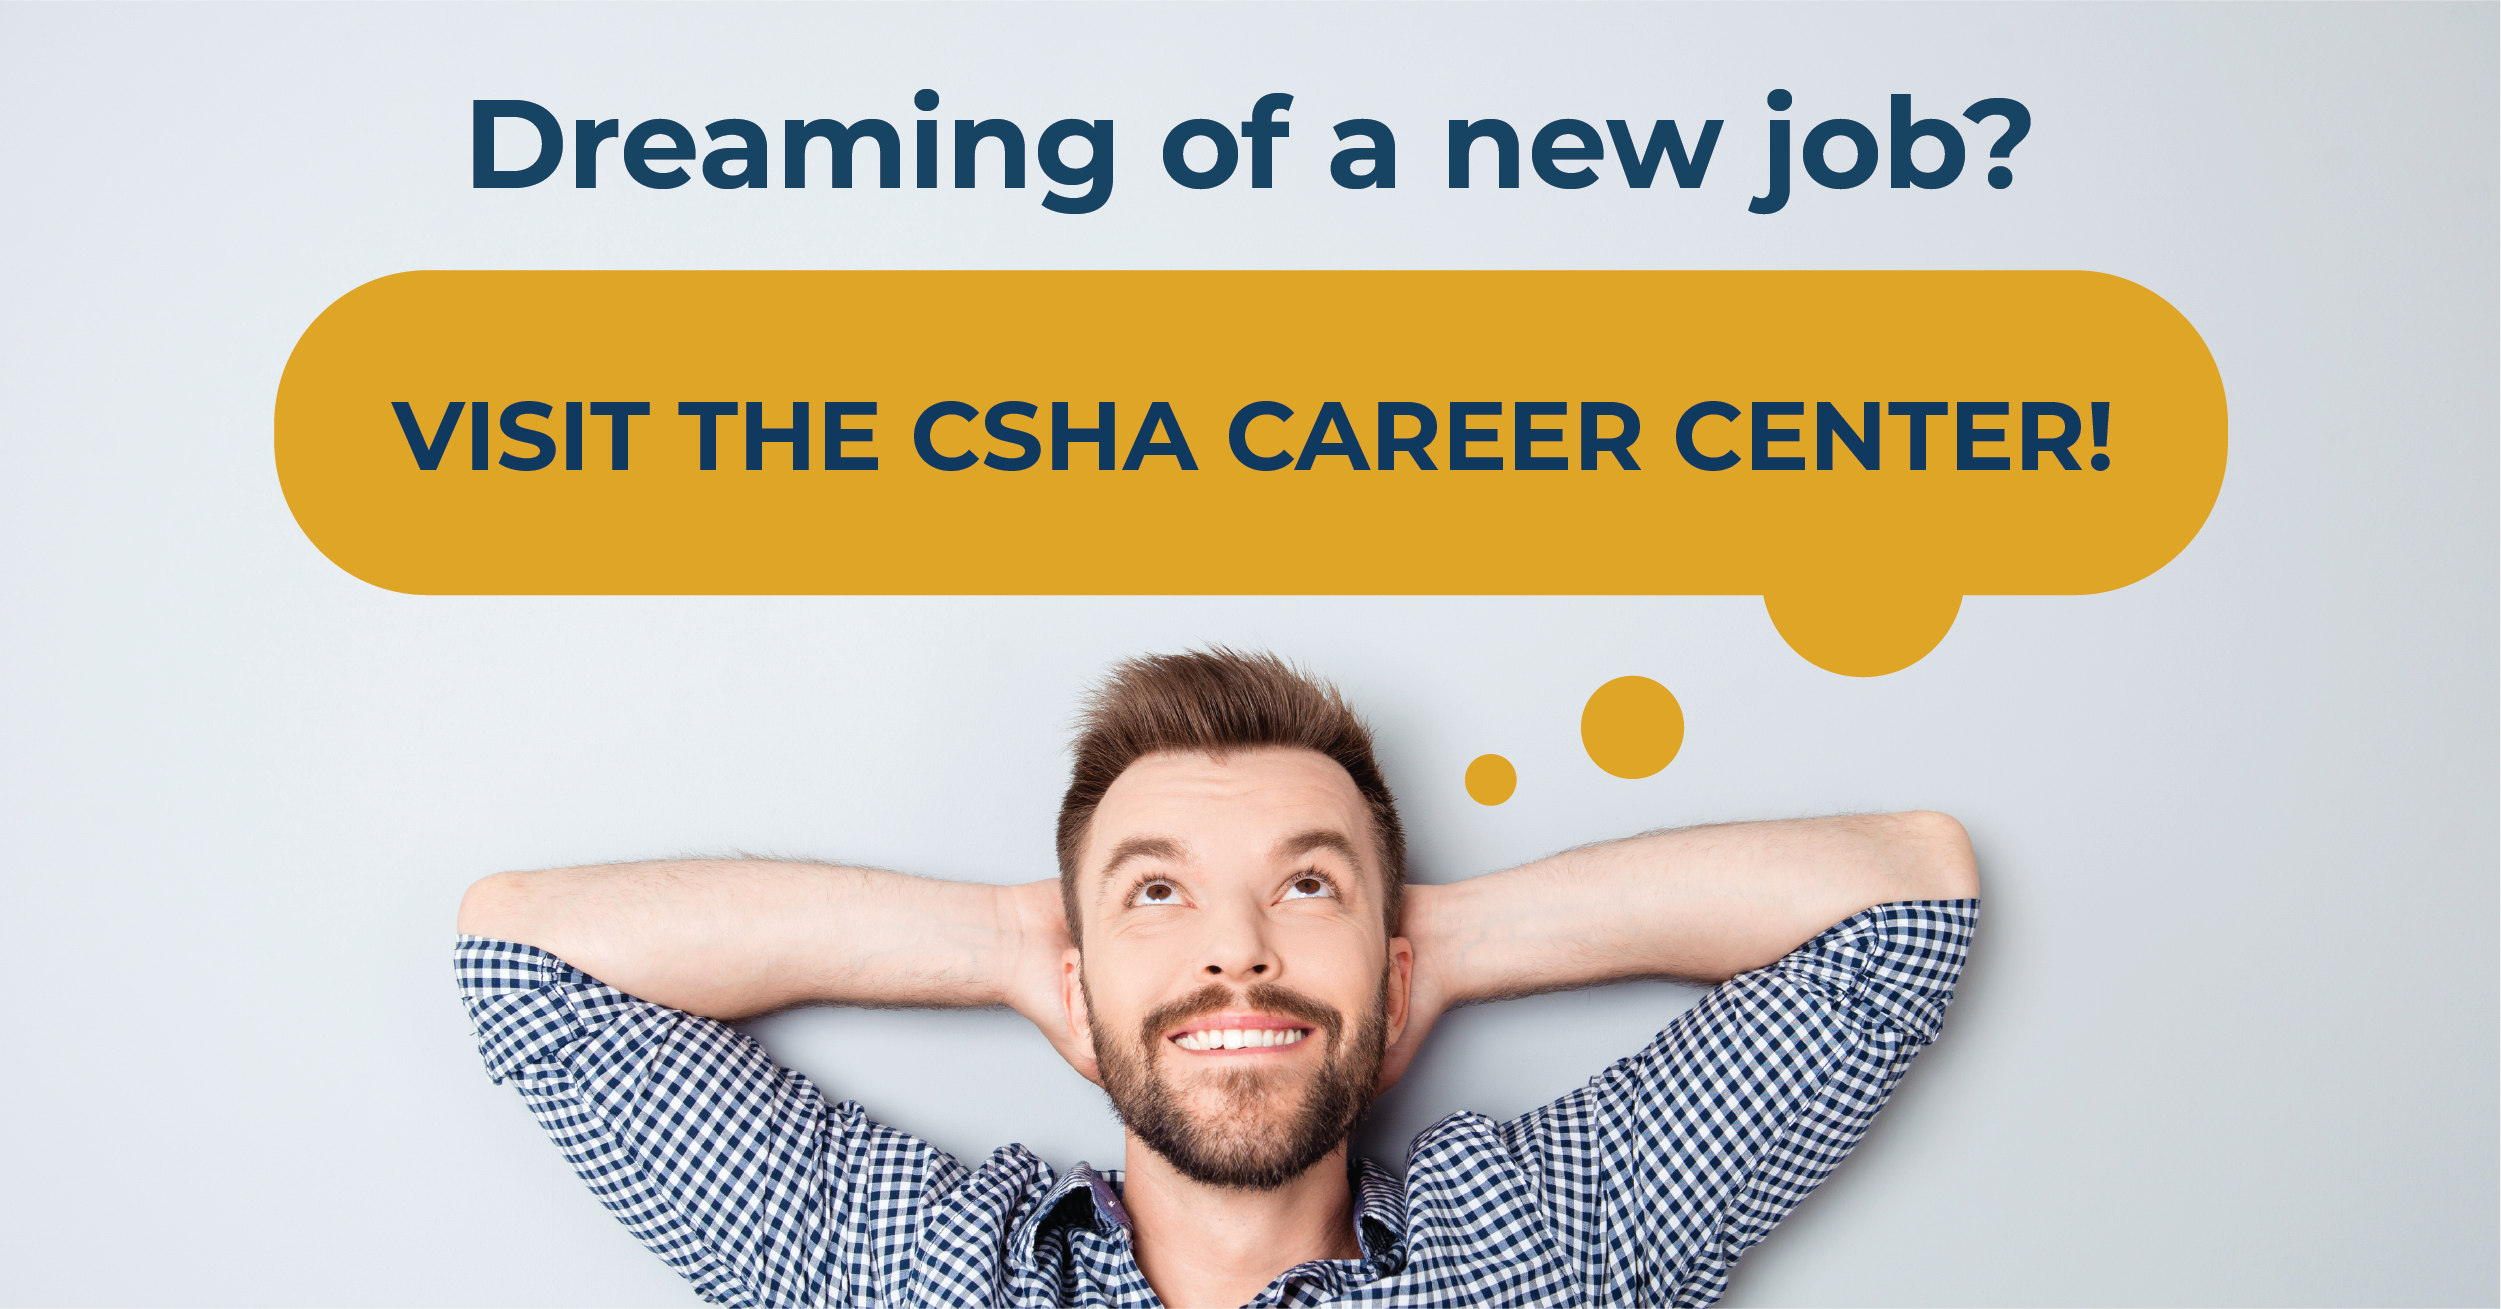 NEWS RELEASE: CSHA Launches New and Improved Career Center